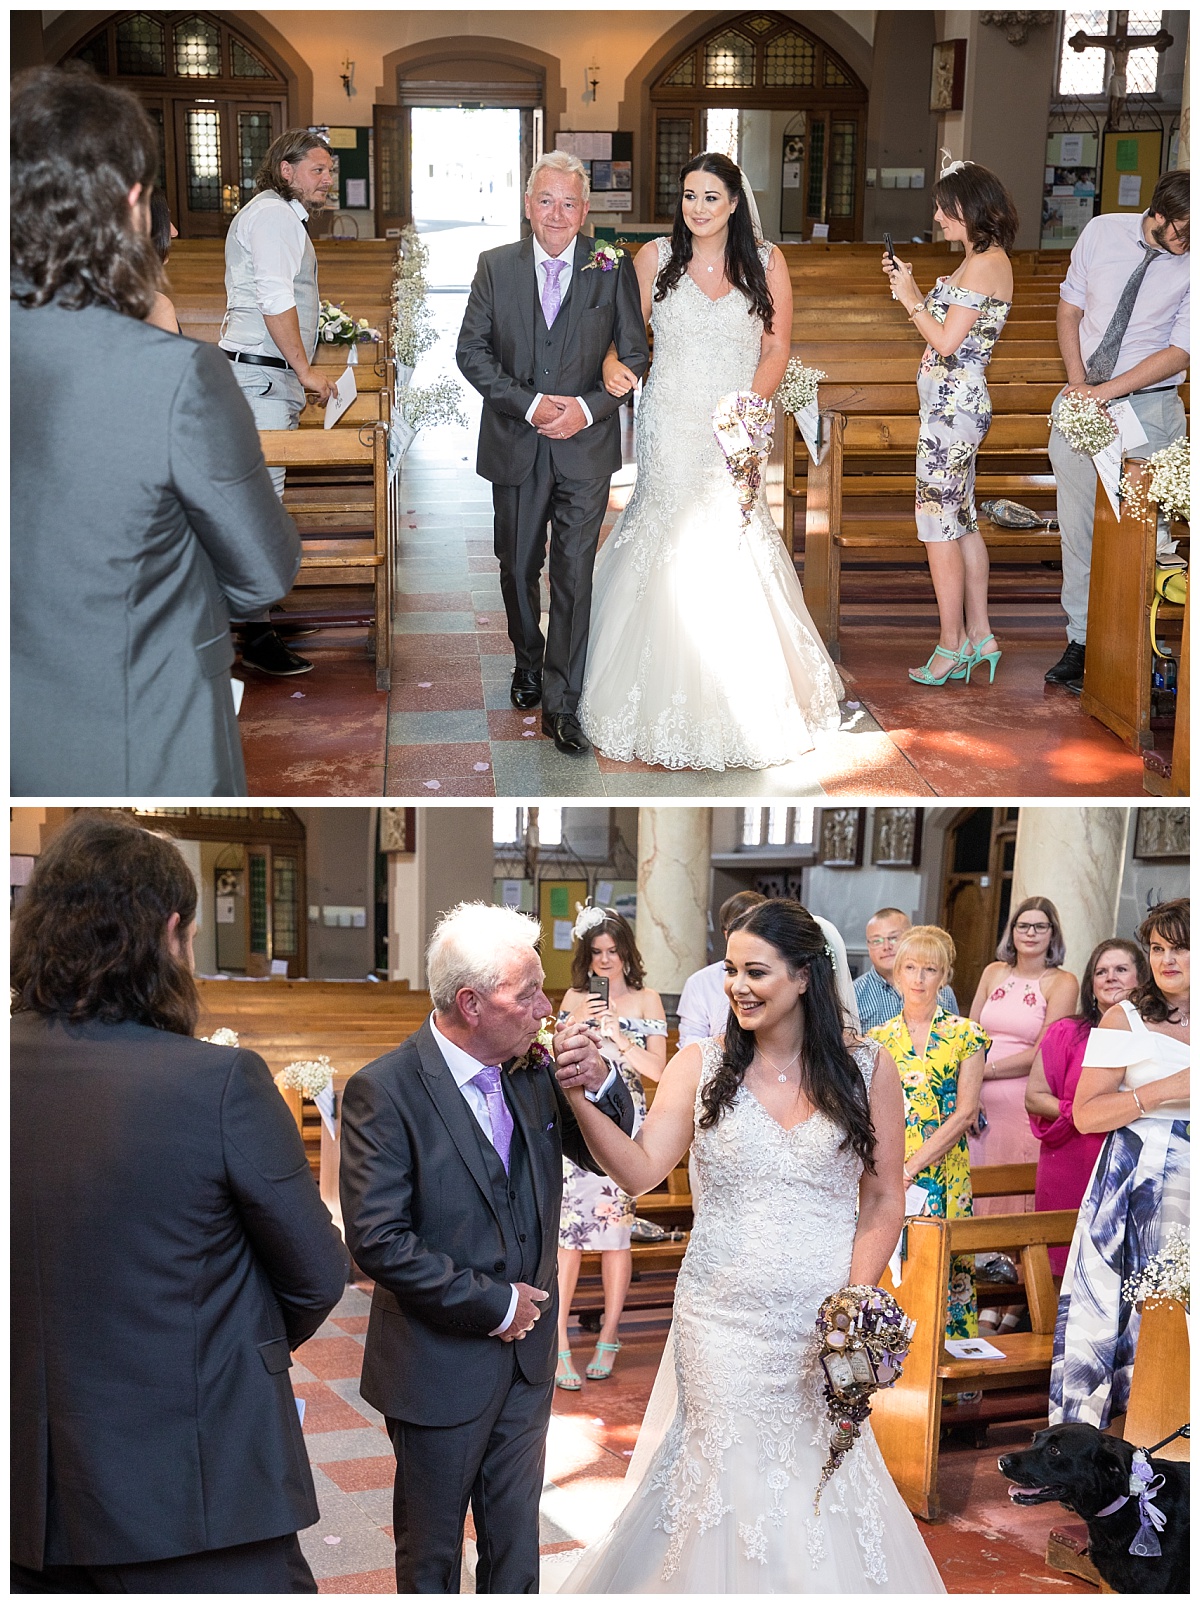 Wedding Photography Manchester - Lauren and Colyn's Wizard Wedding 25